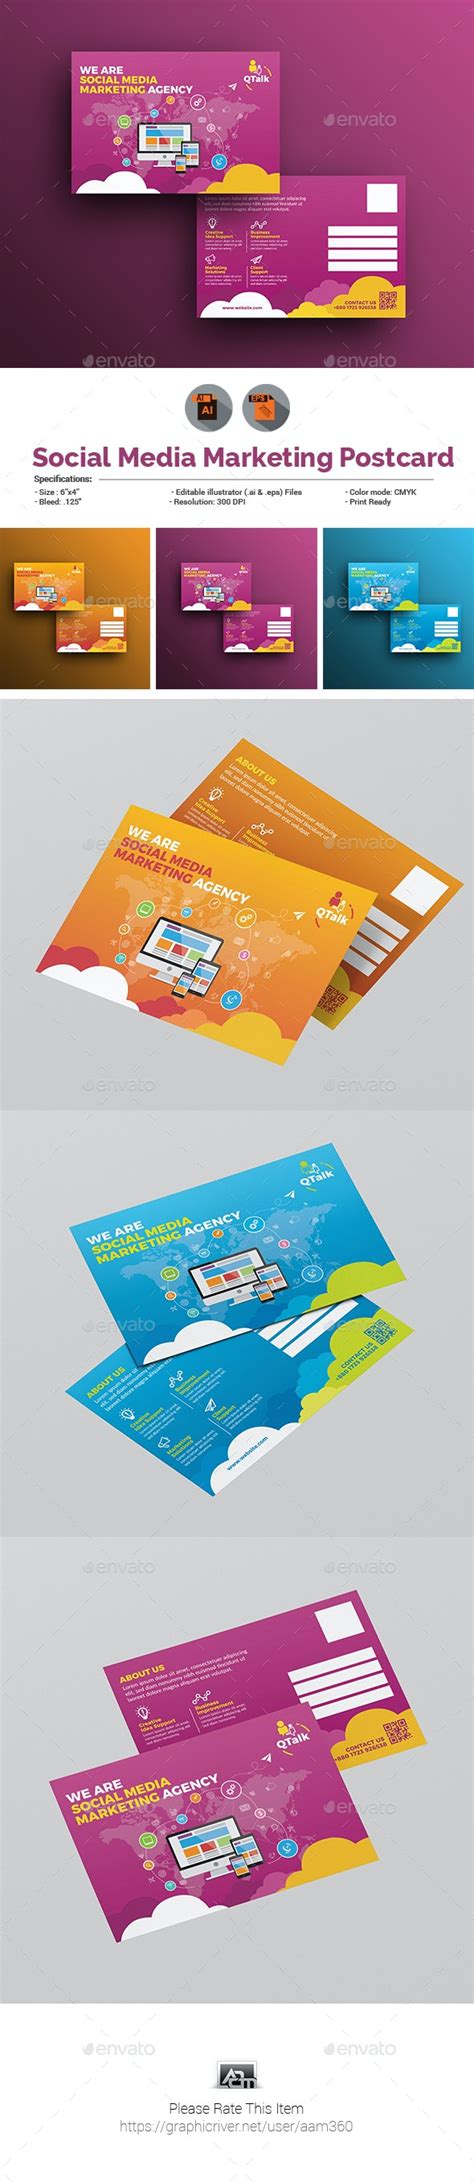 Social Media Marketing Postcard Template By Aam360 Graphicriver